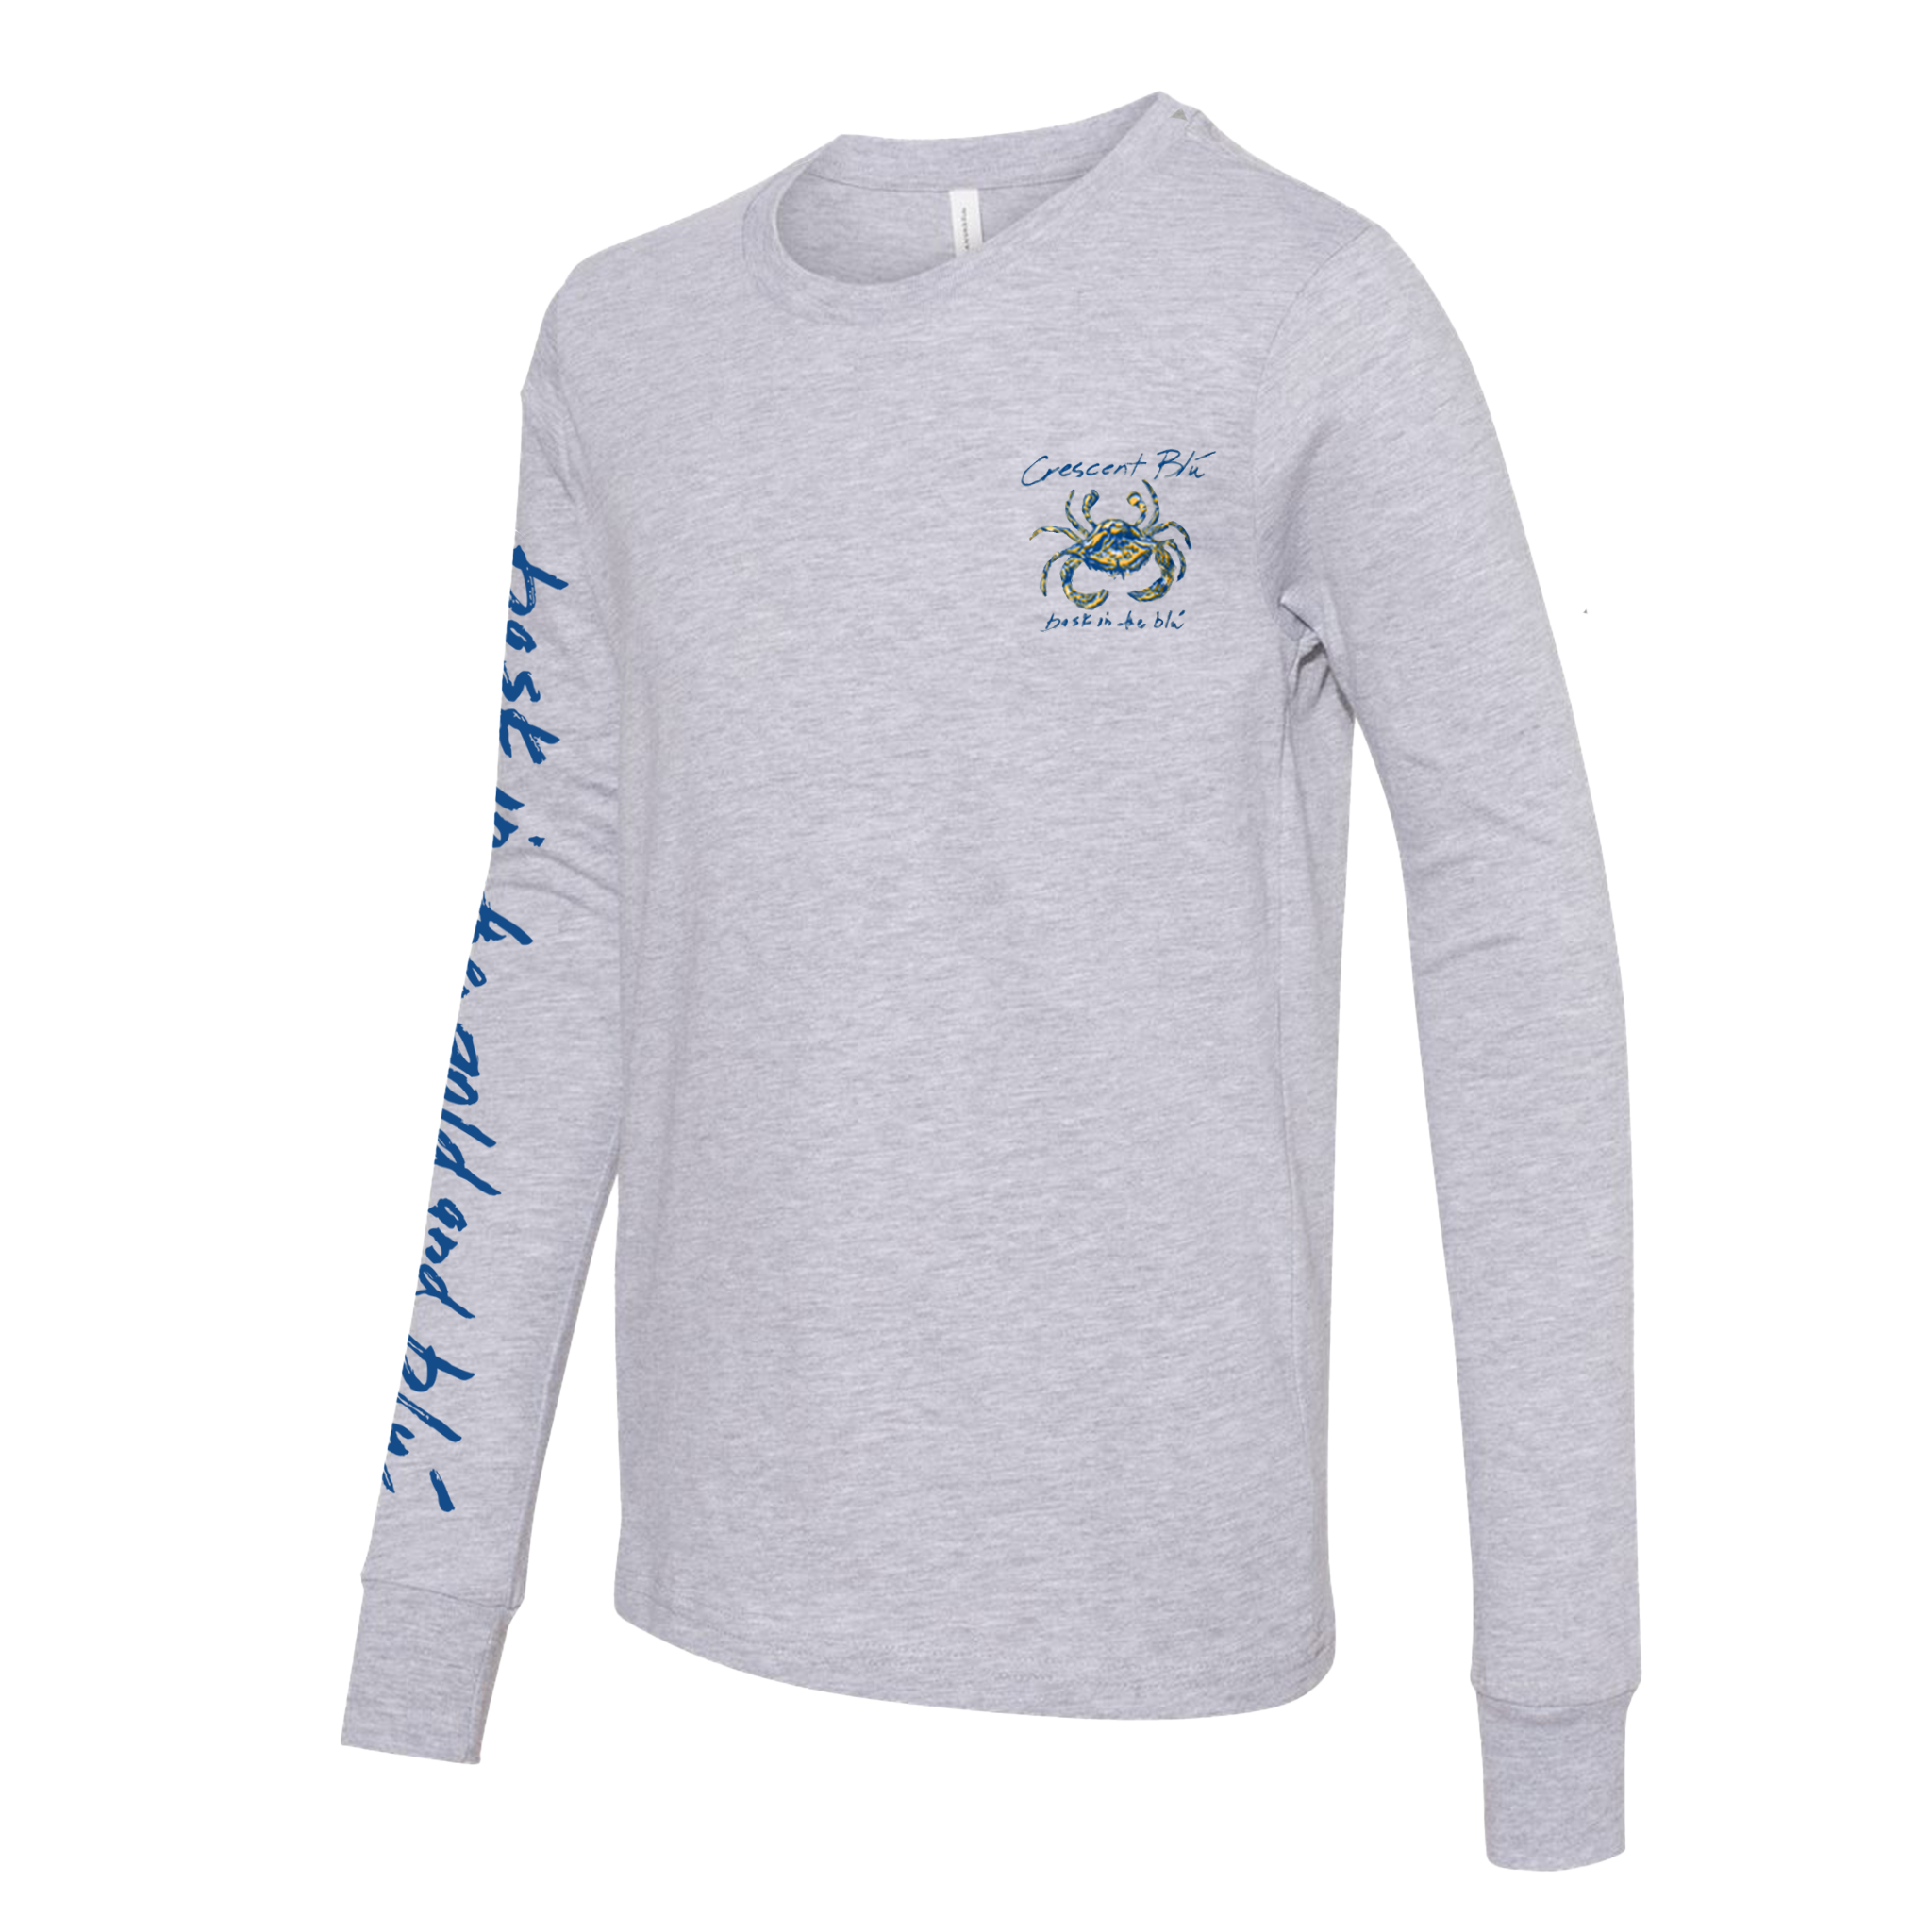 Gold & Blue Youth Long Sleeve T-shirt